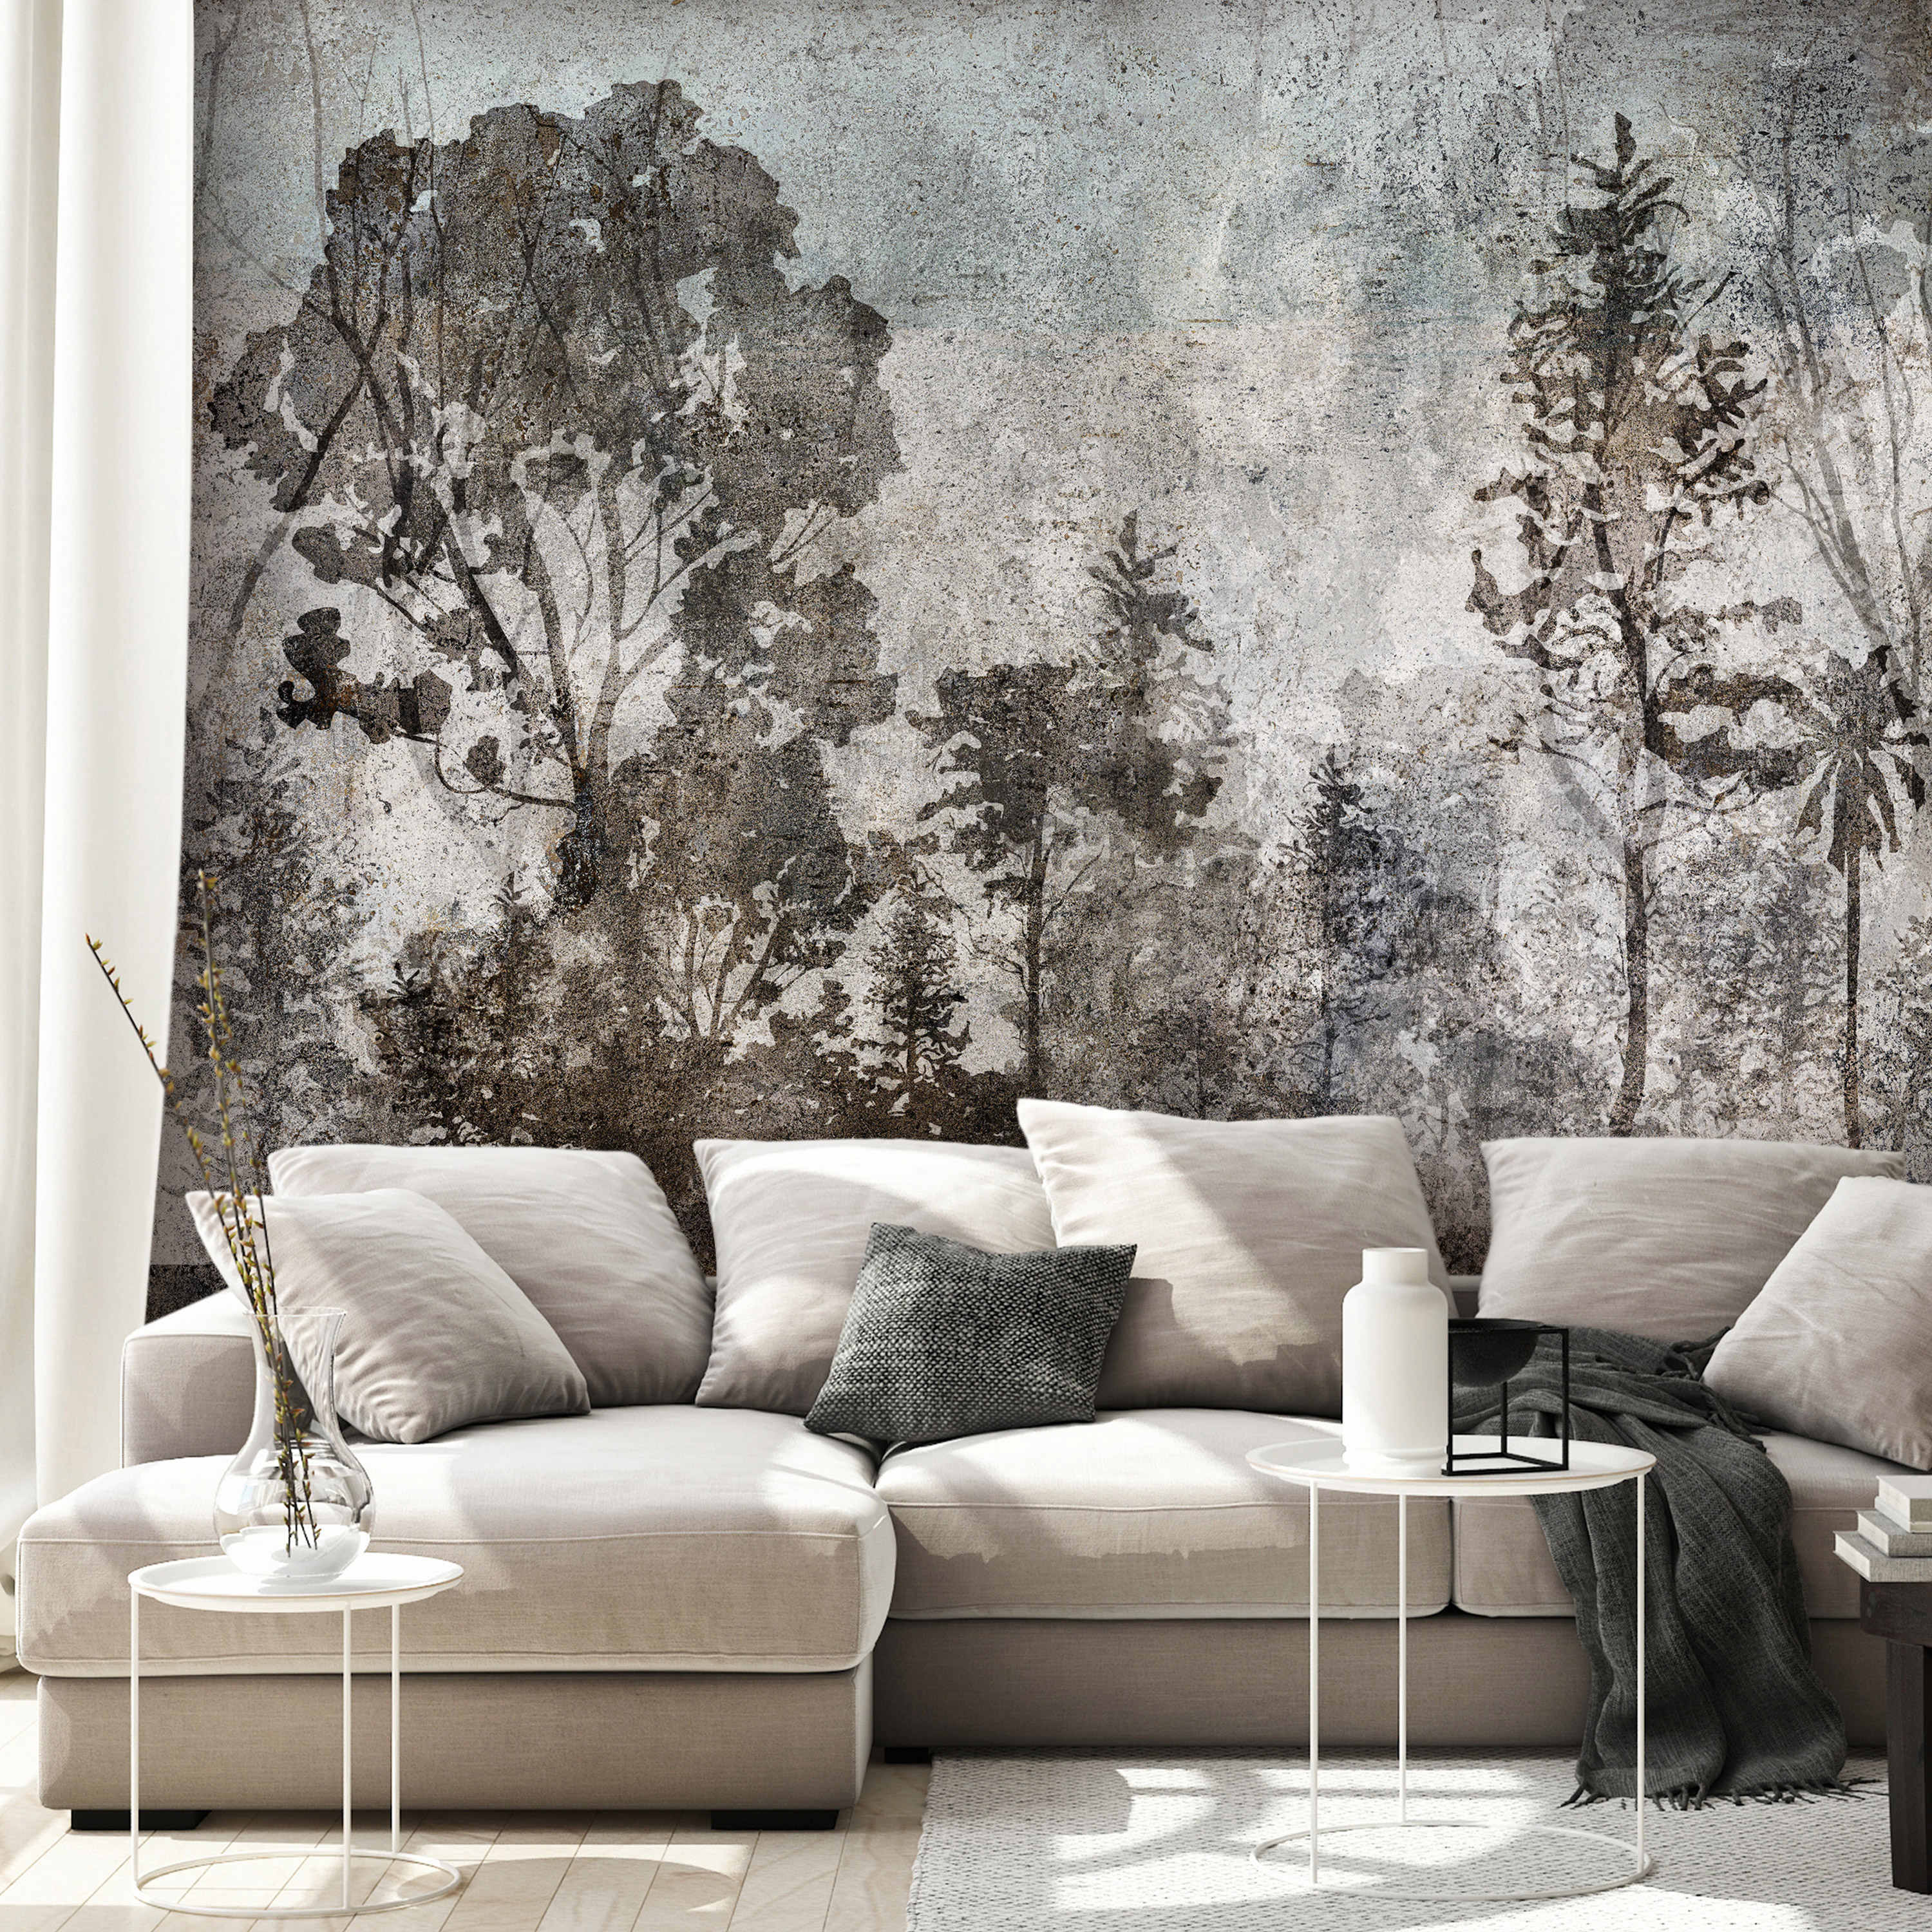 Self-adhesive Wallpaper - Symbiosis With Nature - 98x70